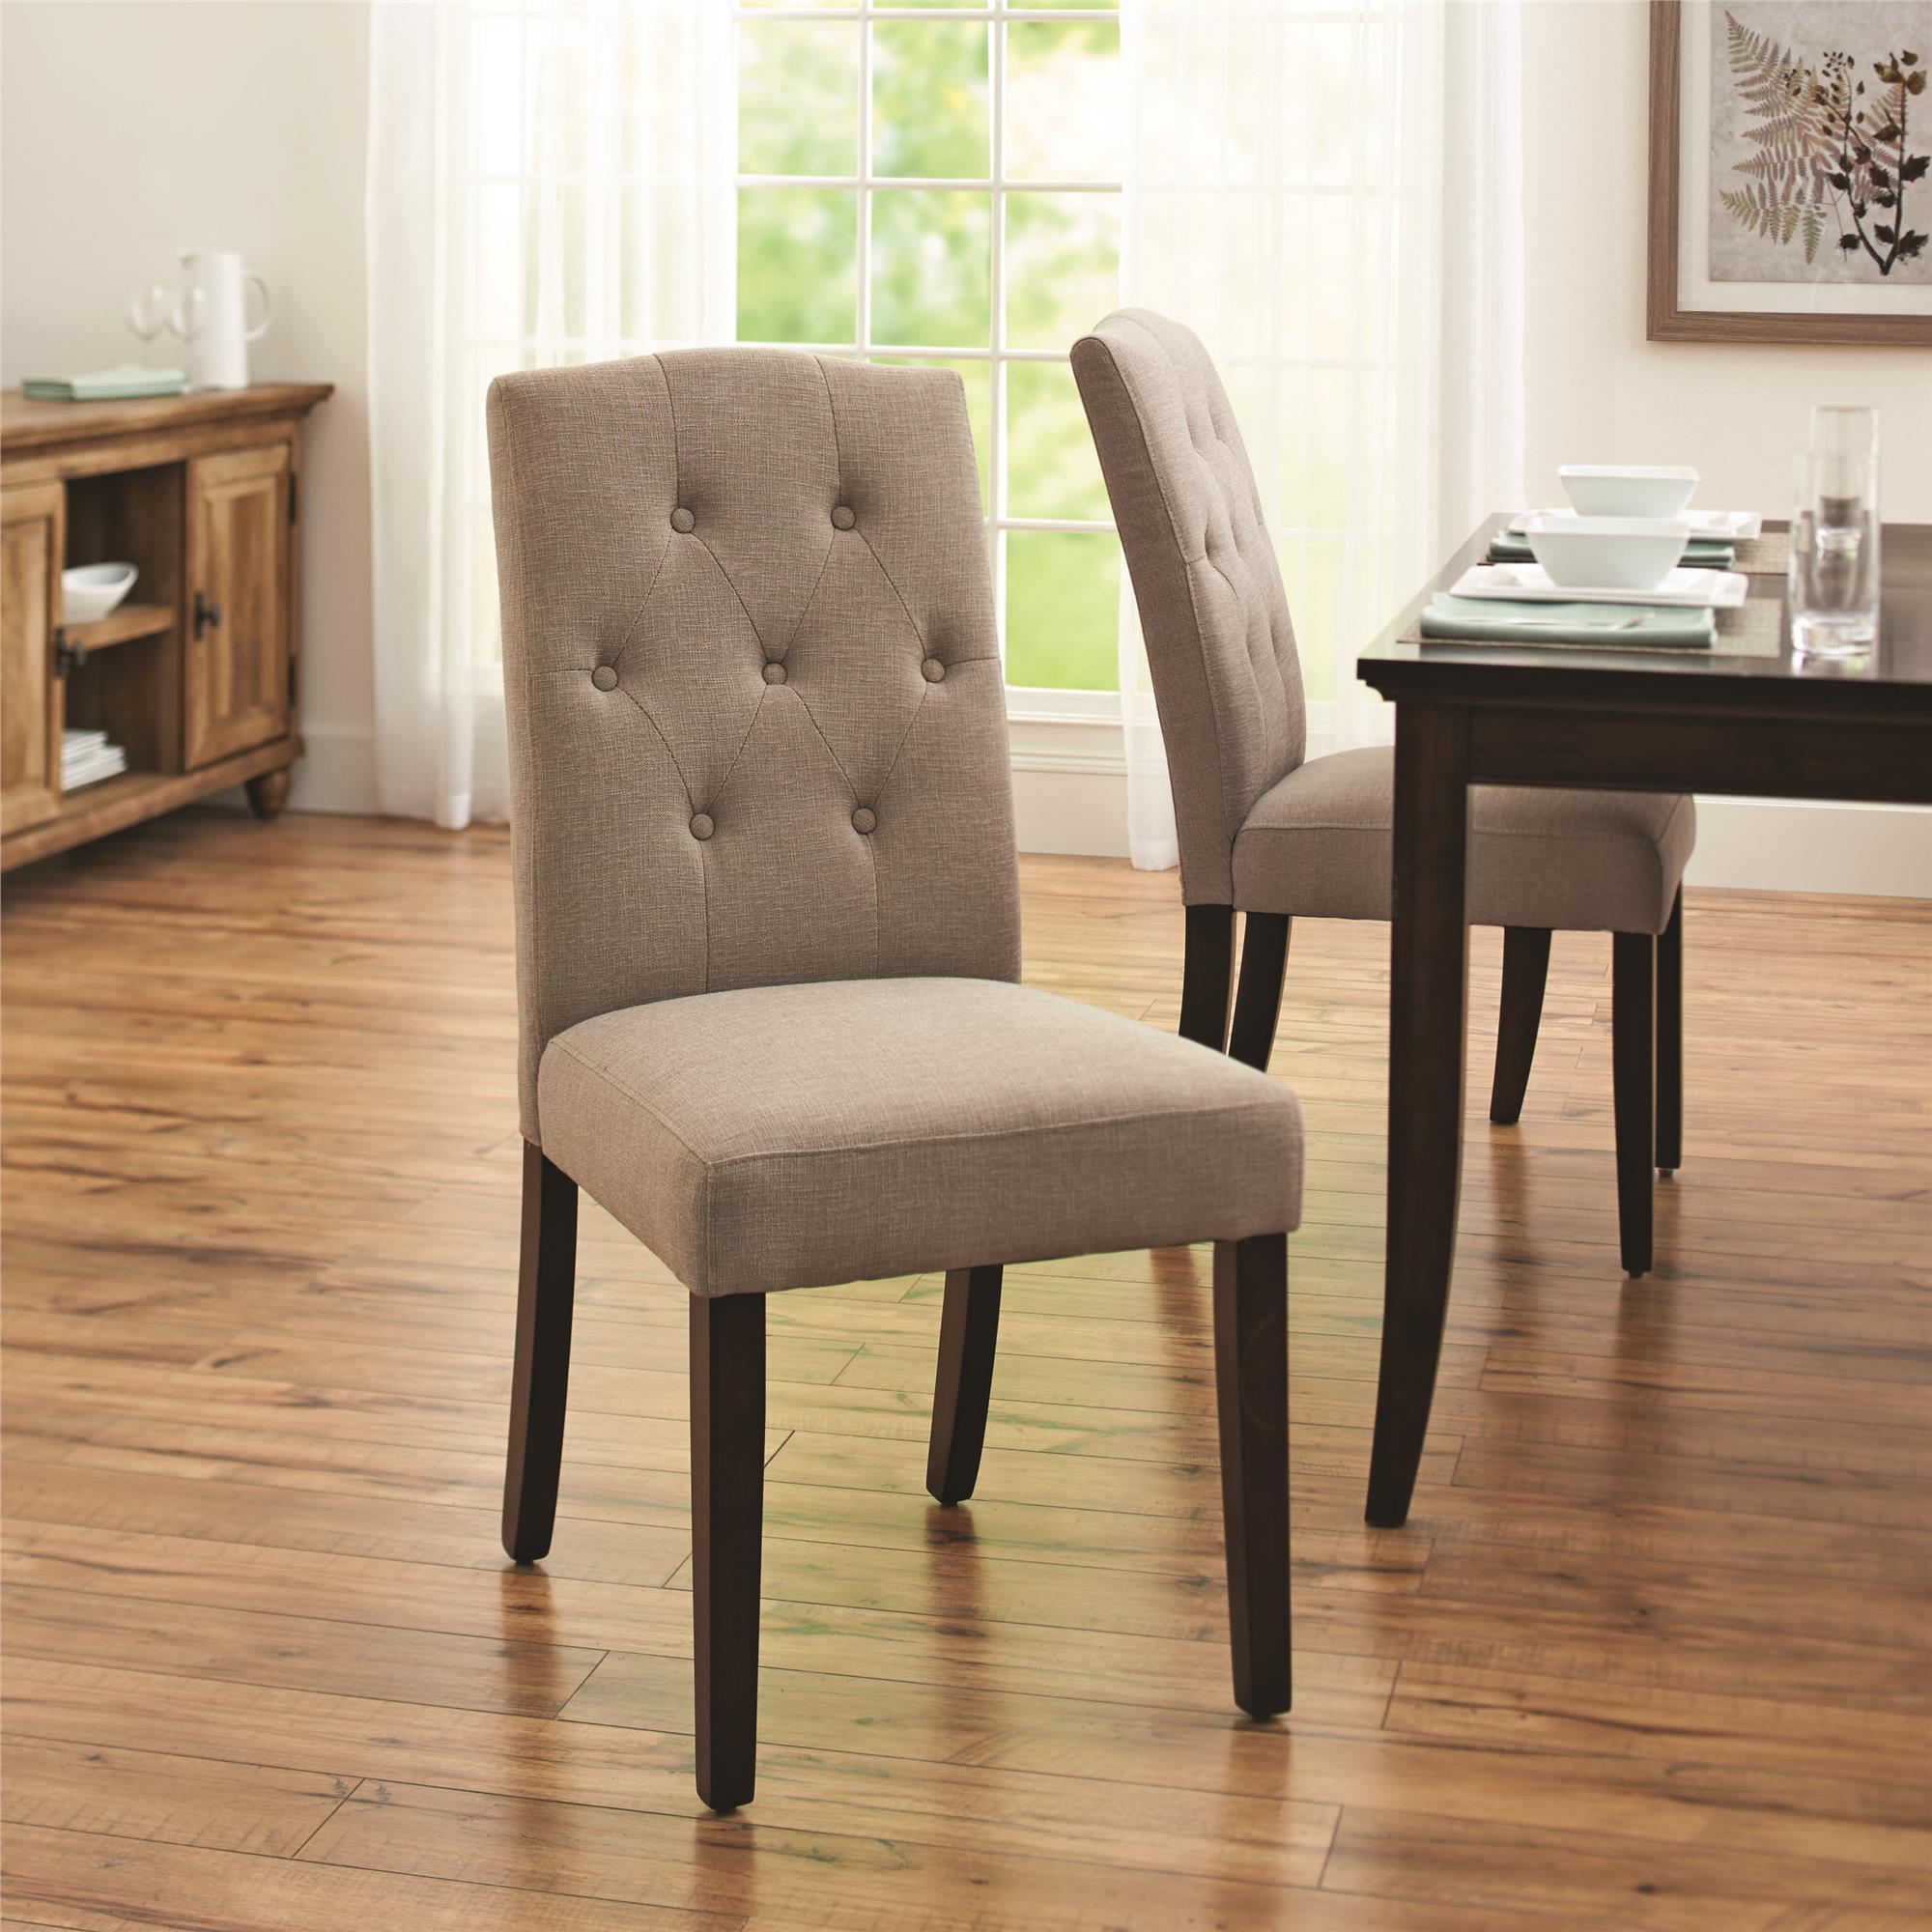 Buy Better Homes And Gardens Parsons Upholstered Tufted Dining